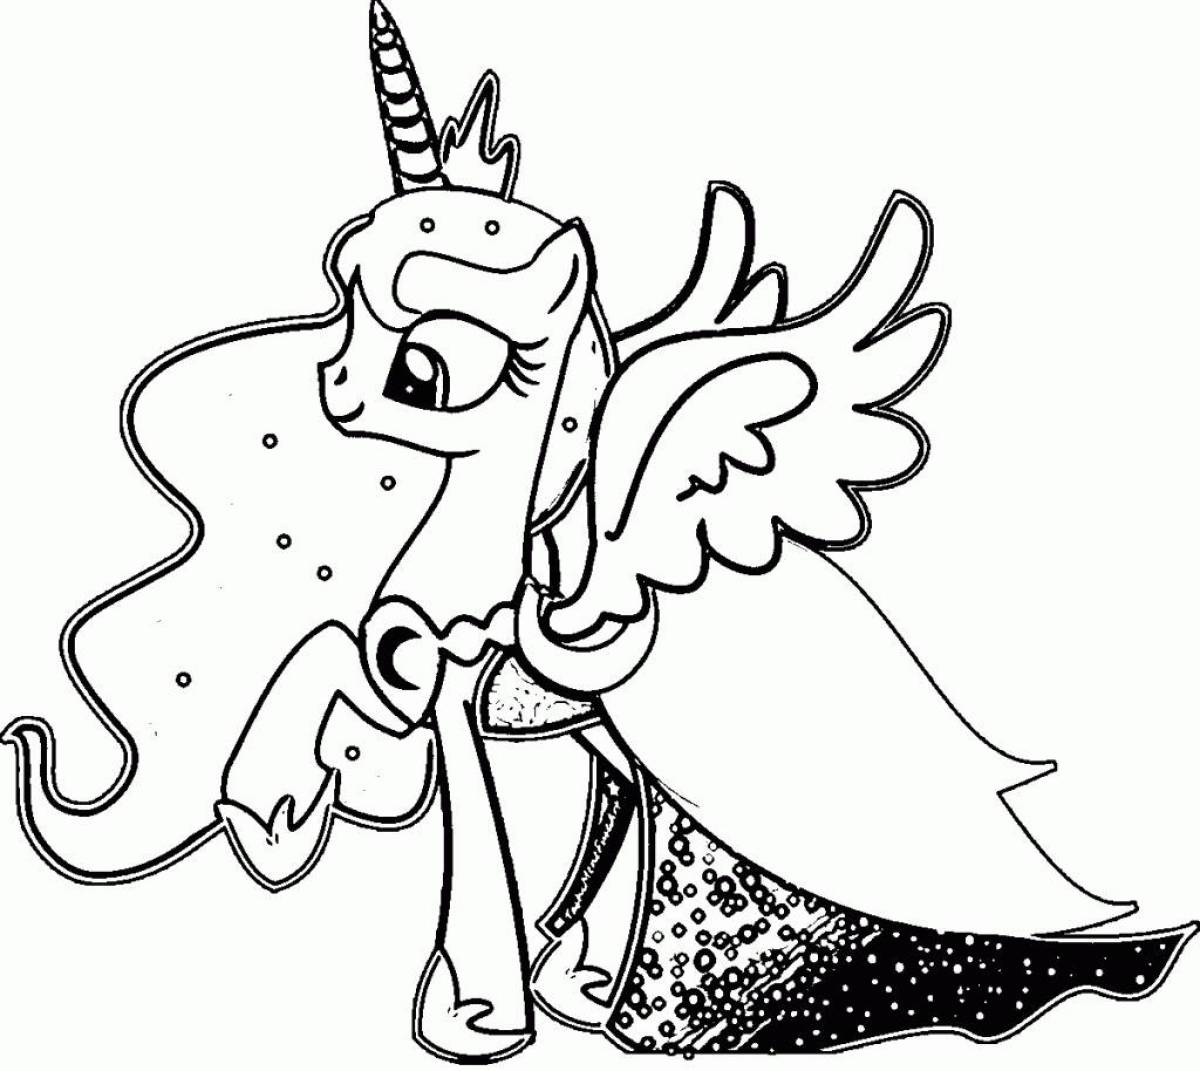 Gorgeous princess moon coloring page